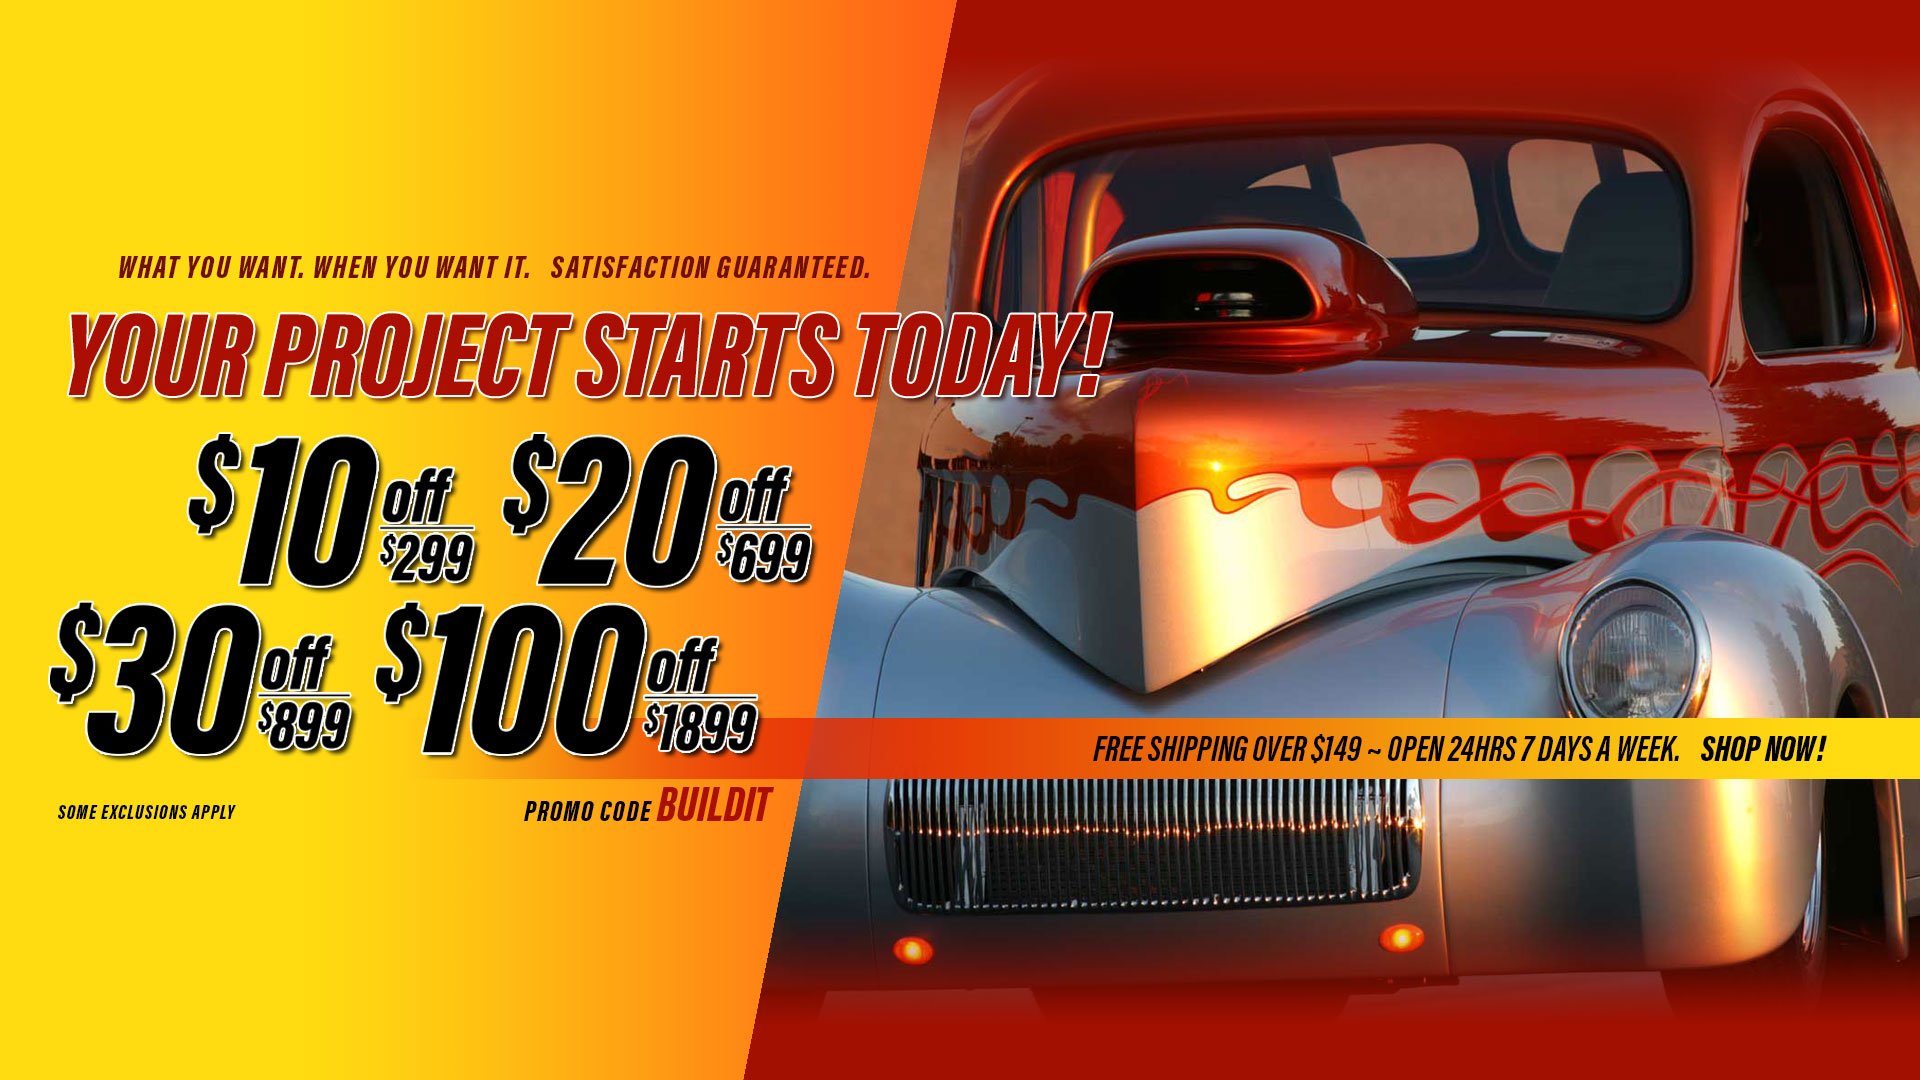 Save $10 Off $299, $20 Off $699, $30 Off $899, $100 Off $1,899 Orders - Promo Code: BUILDIT